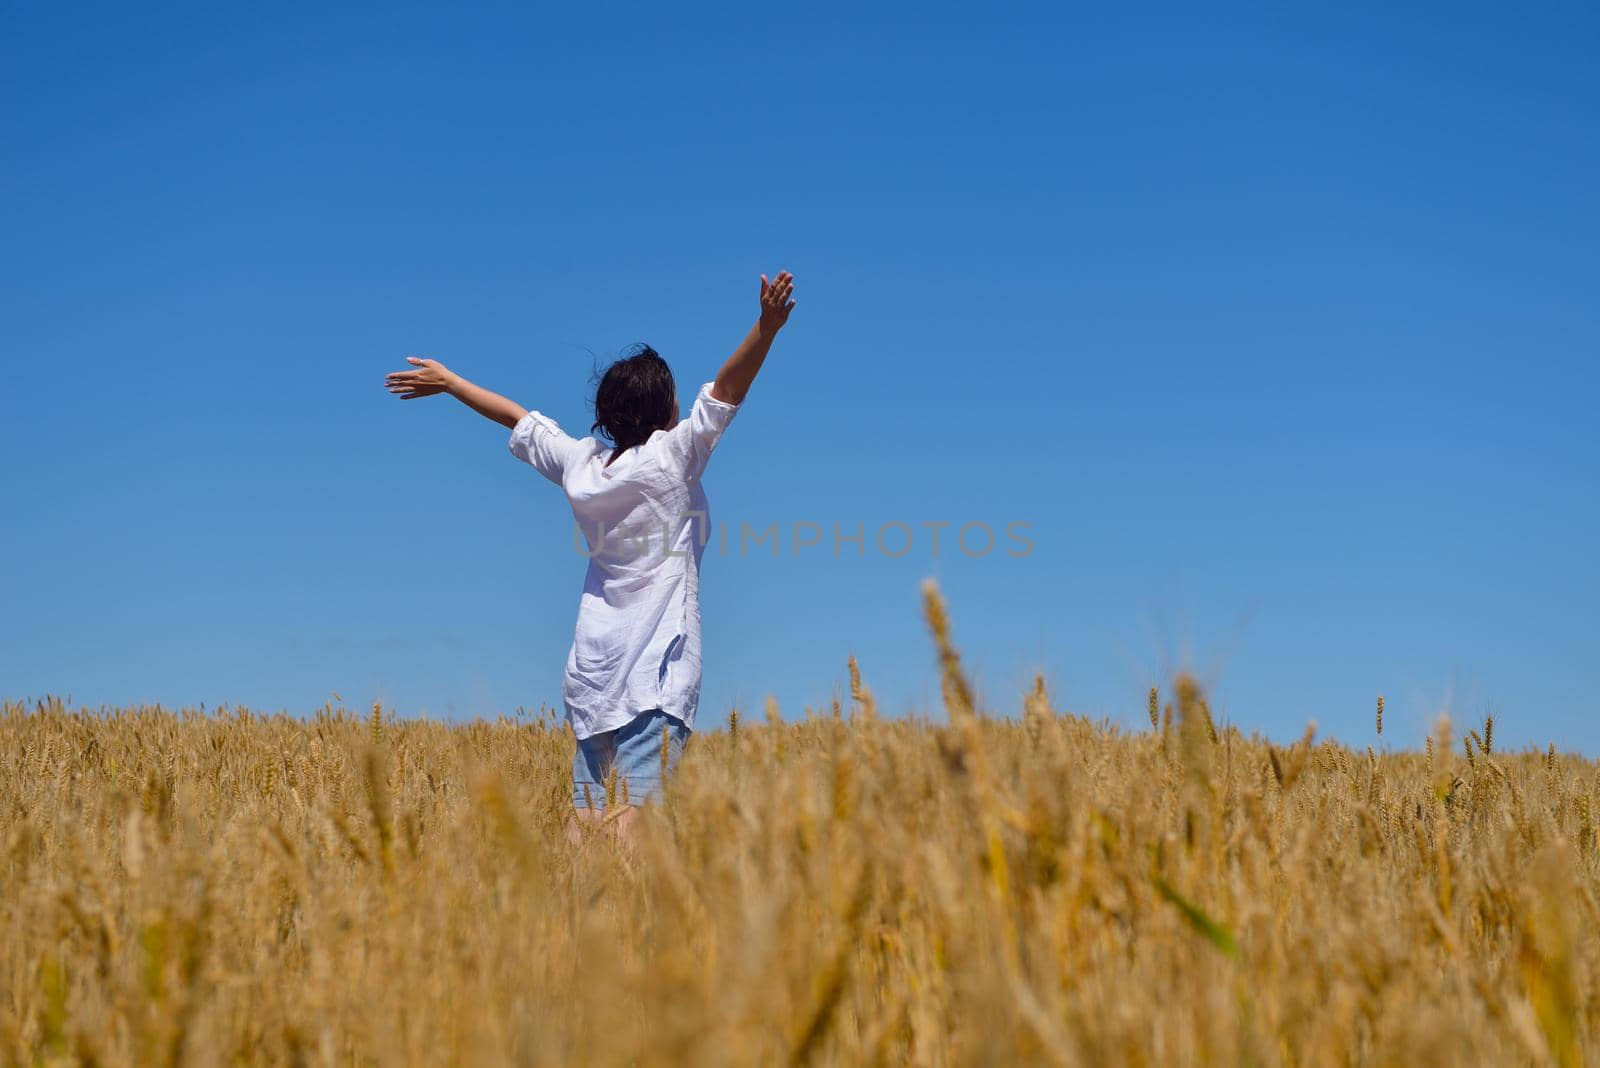 healthy Happy  young woman with spreading arms, blue sky with clouds in background  - copyspace